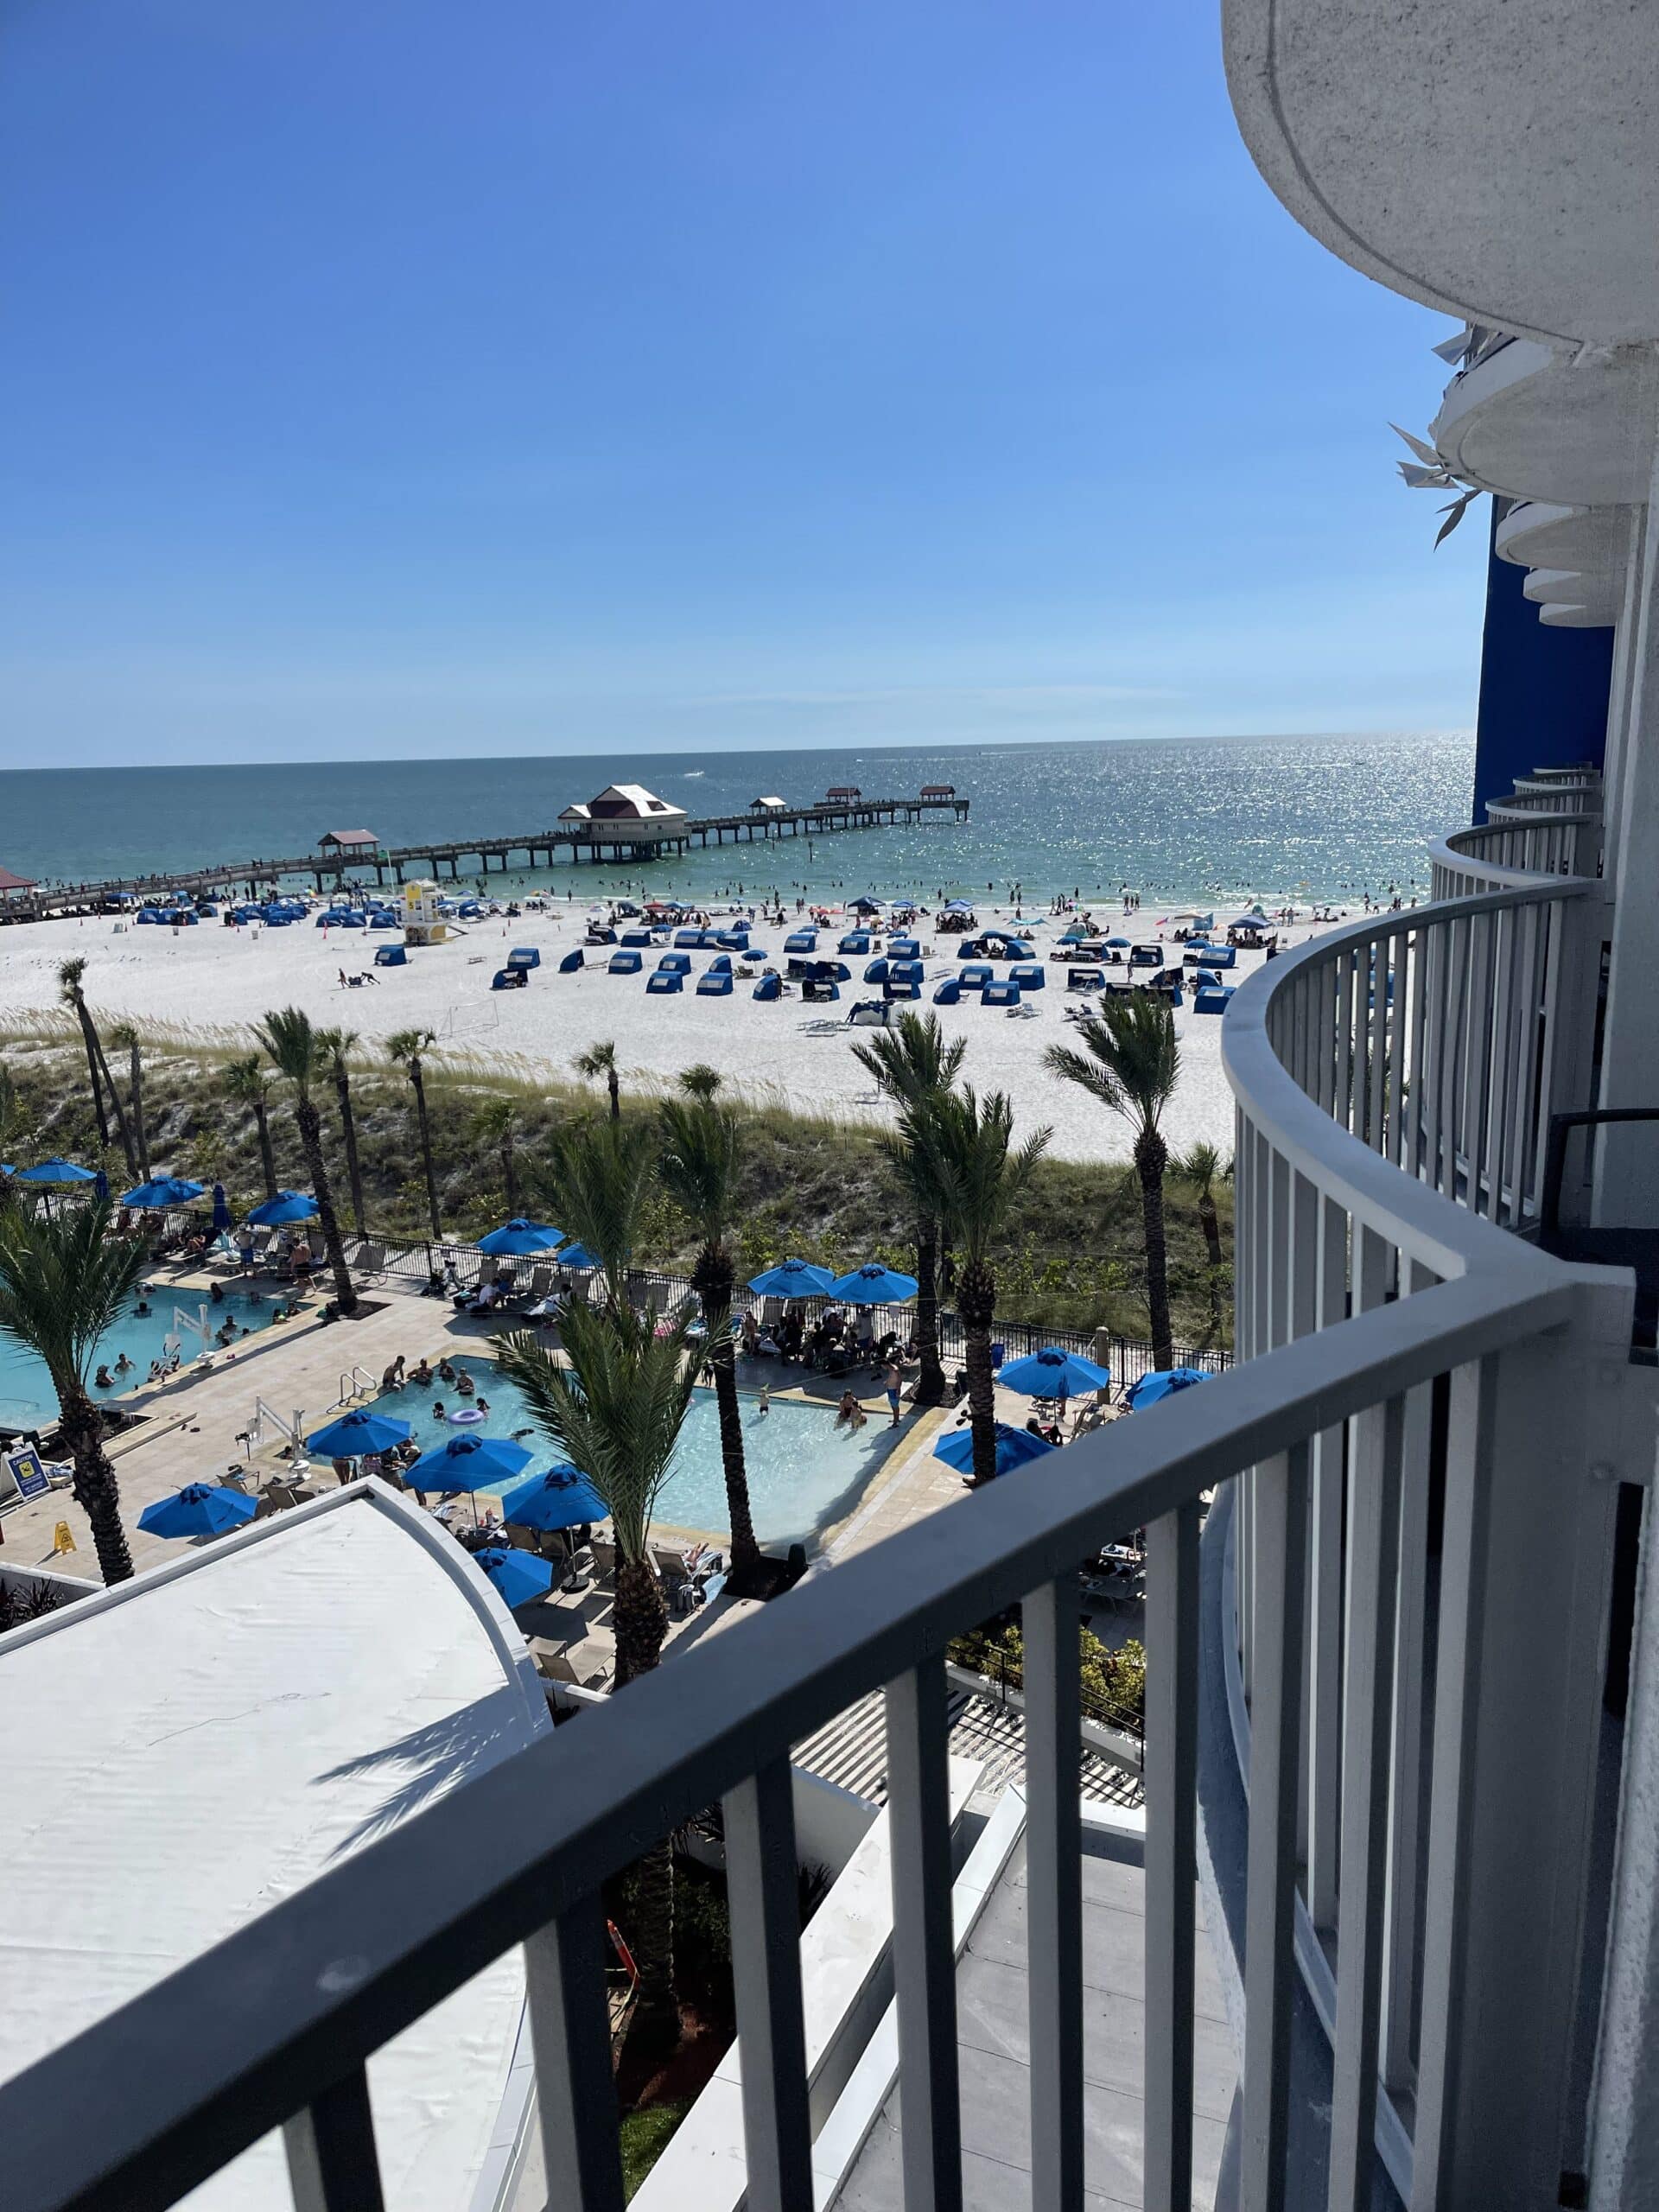 Balcony View at Hilton Clearwater Beach Resort